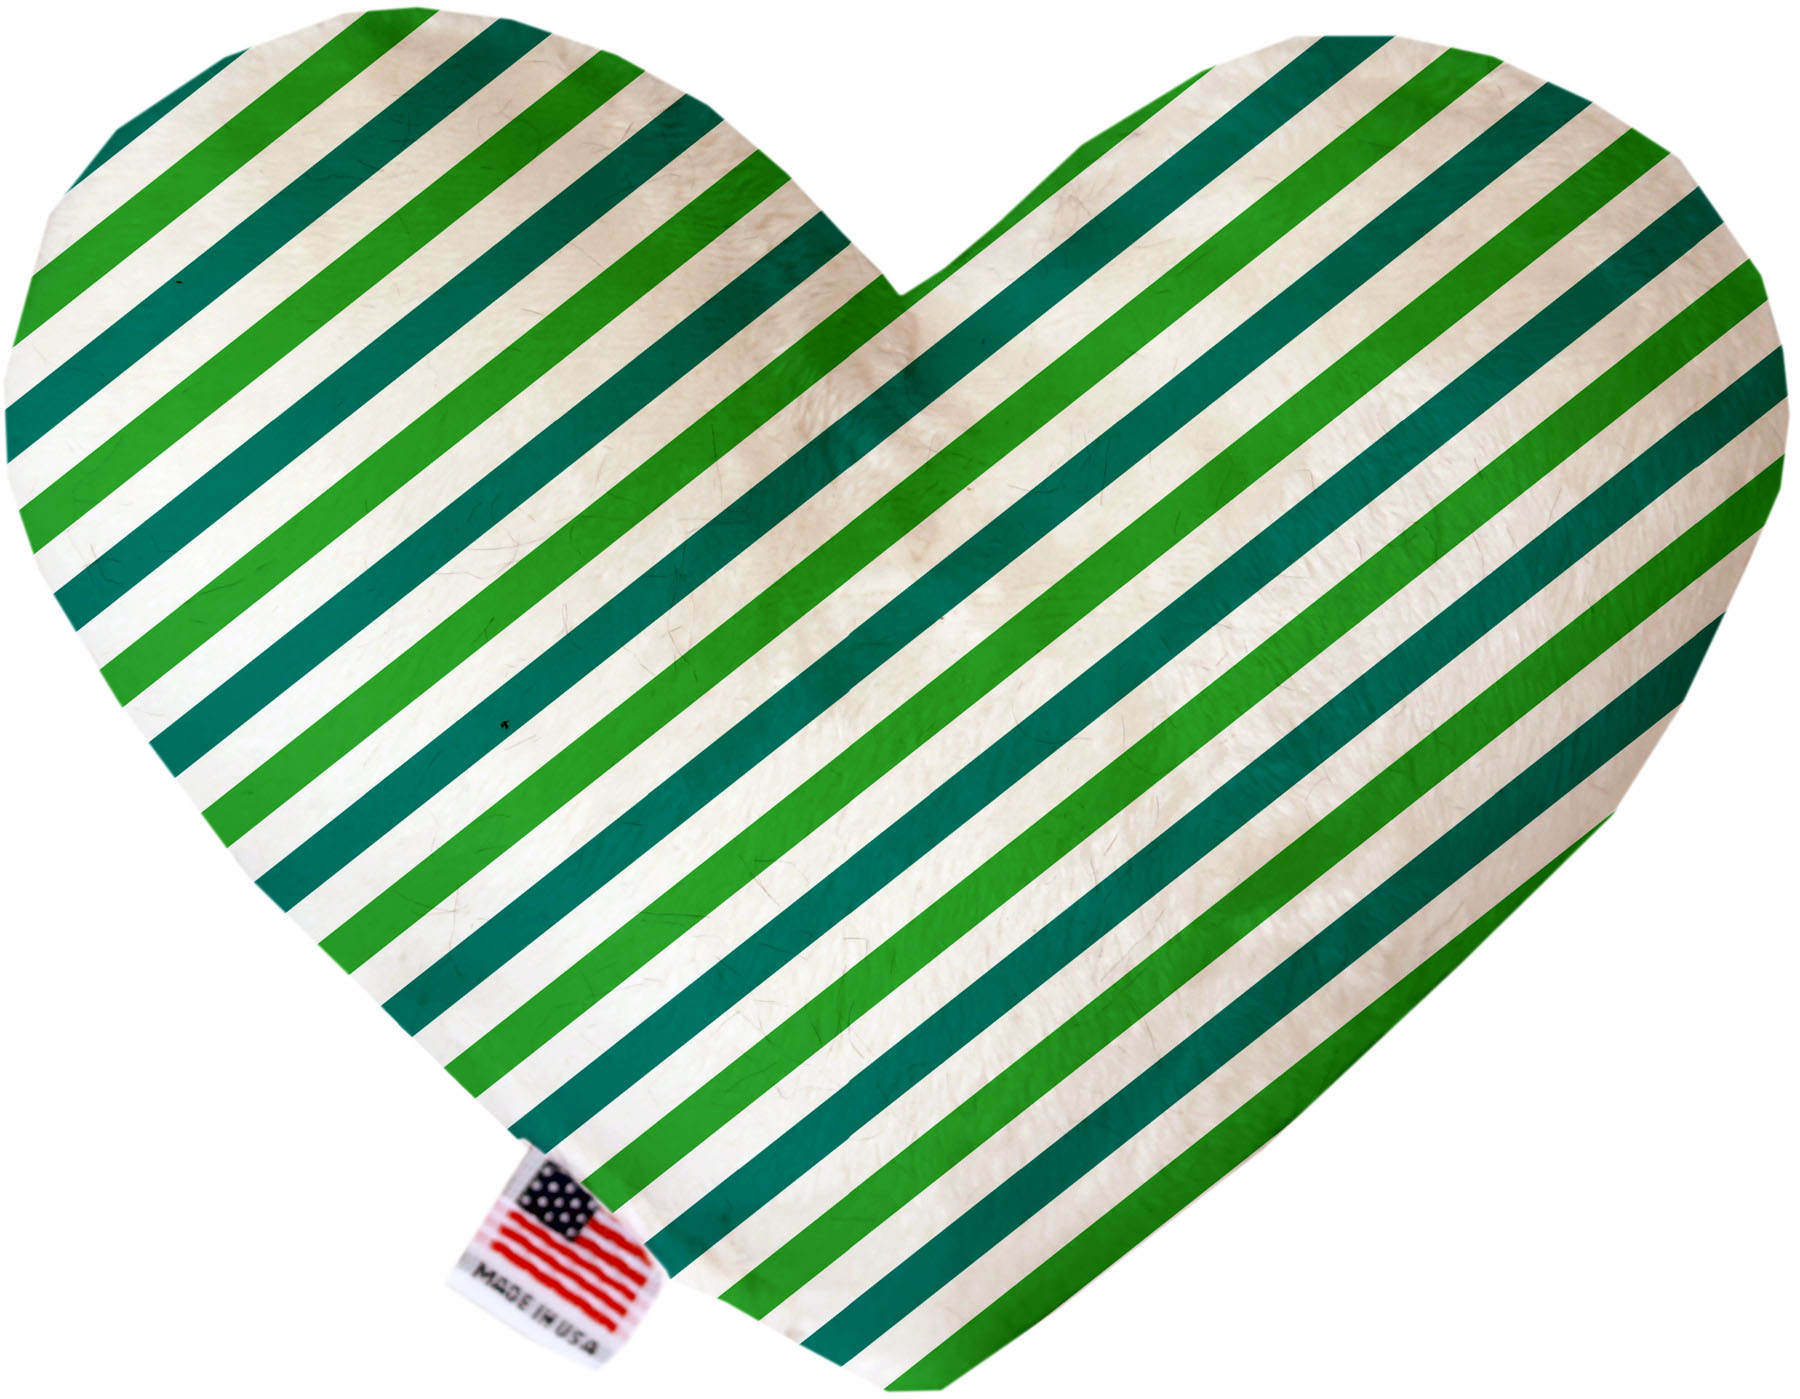 Lucky Stripes 6 inch Heart Dog Toy